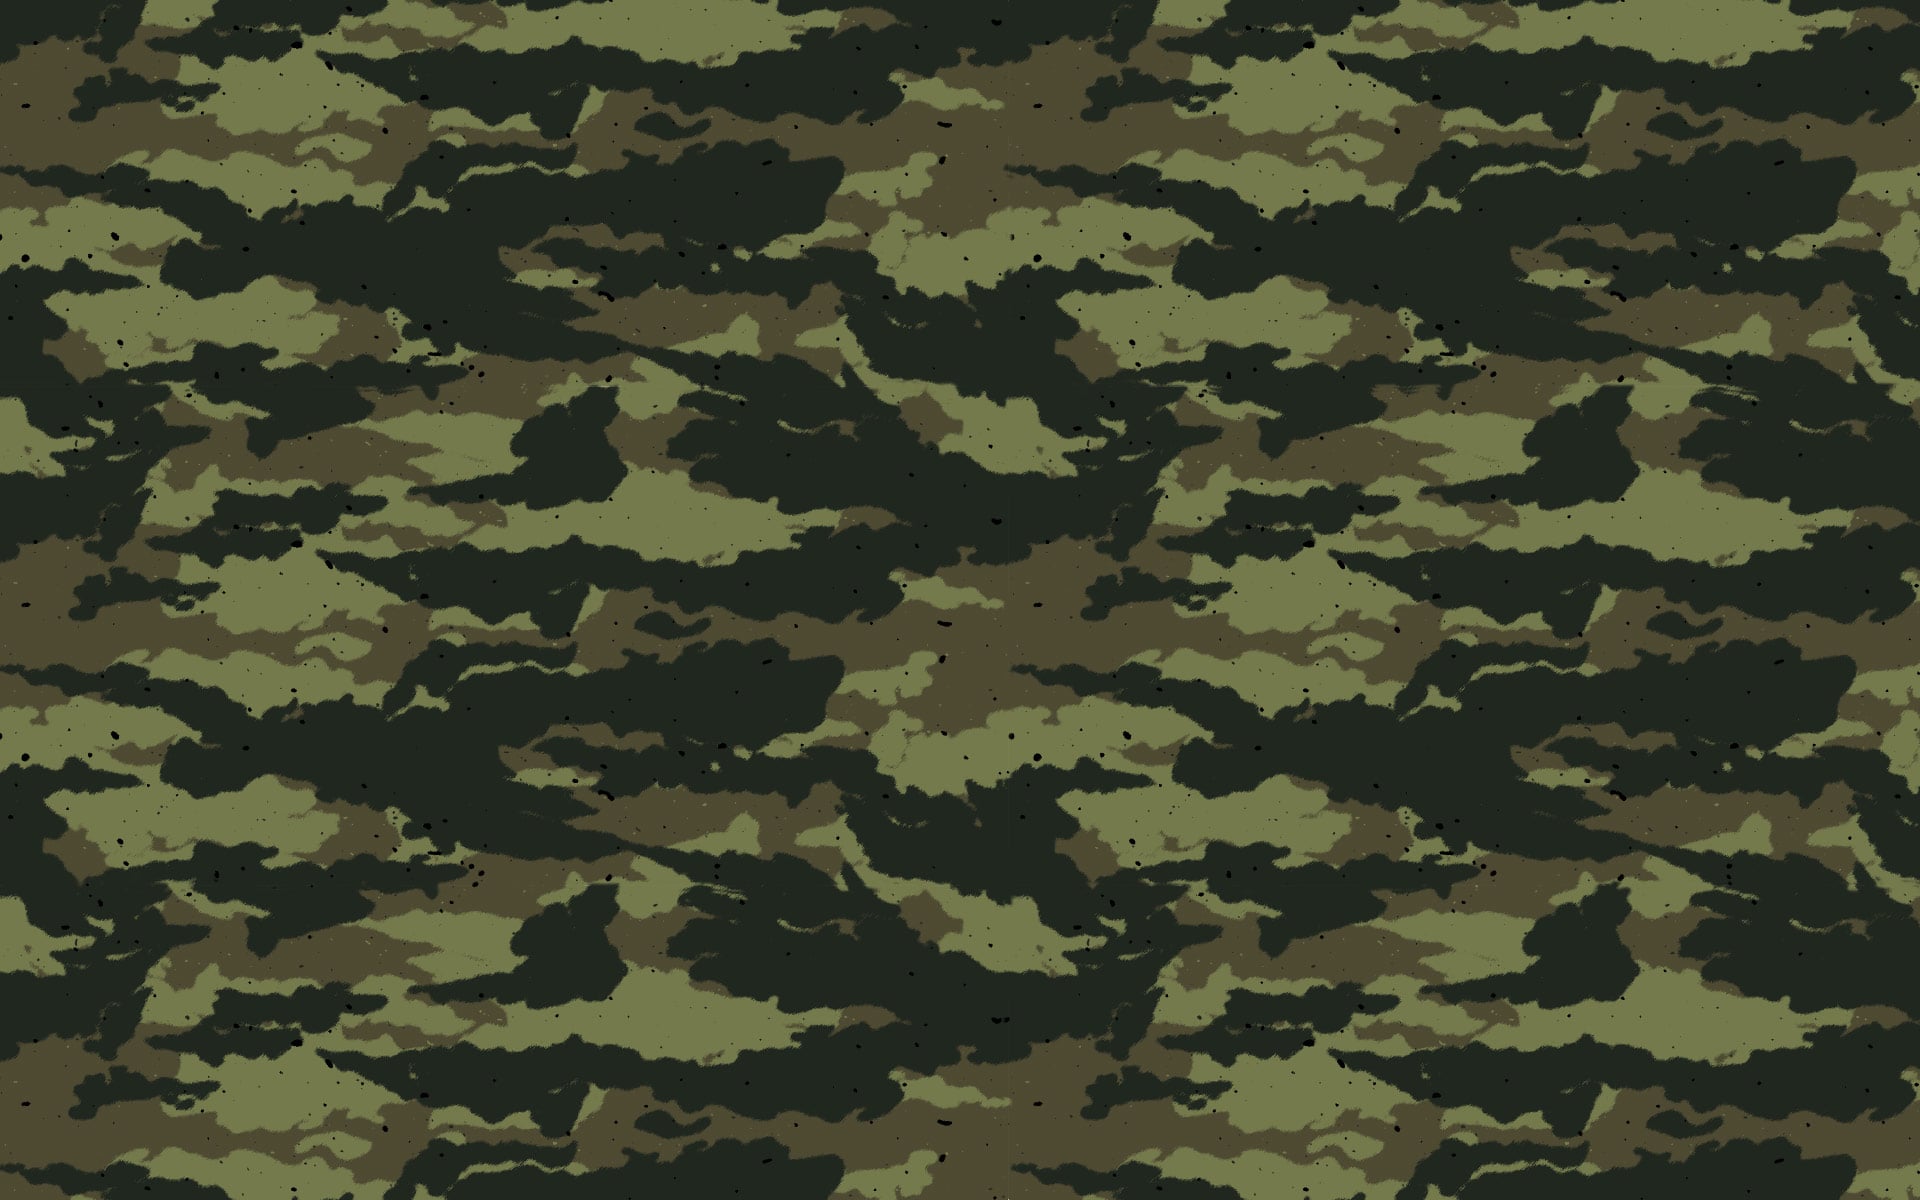 Camo. Pretty iPhone Wallpaper That Don't Cost a Thing